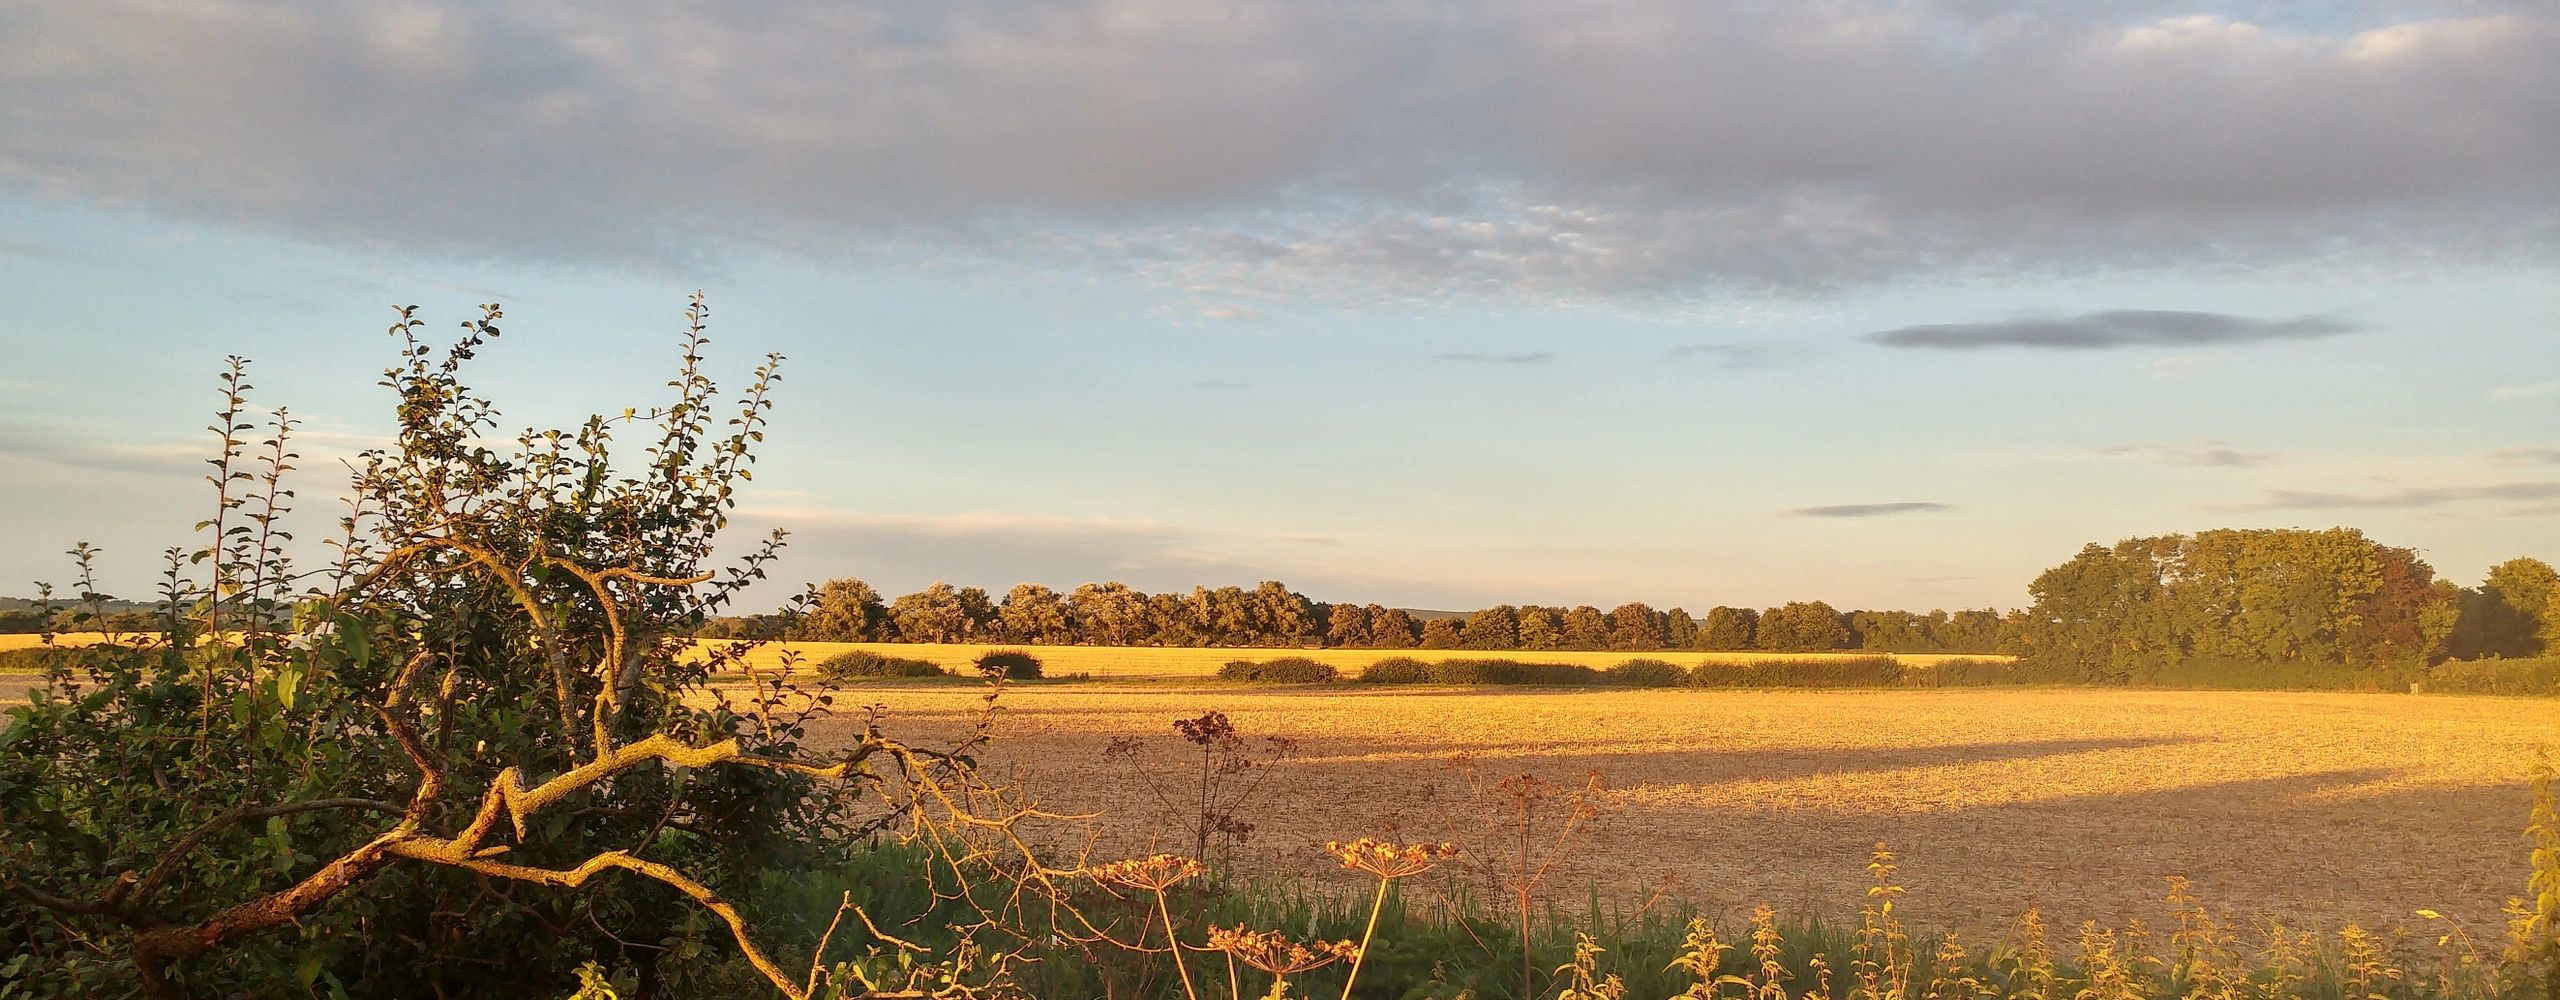 A field in Ashington lit by a golden sunset. Hedgerow in foreground and group of trees further away.